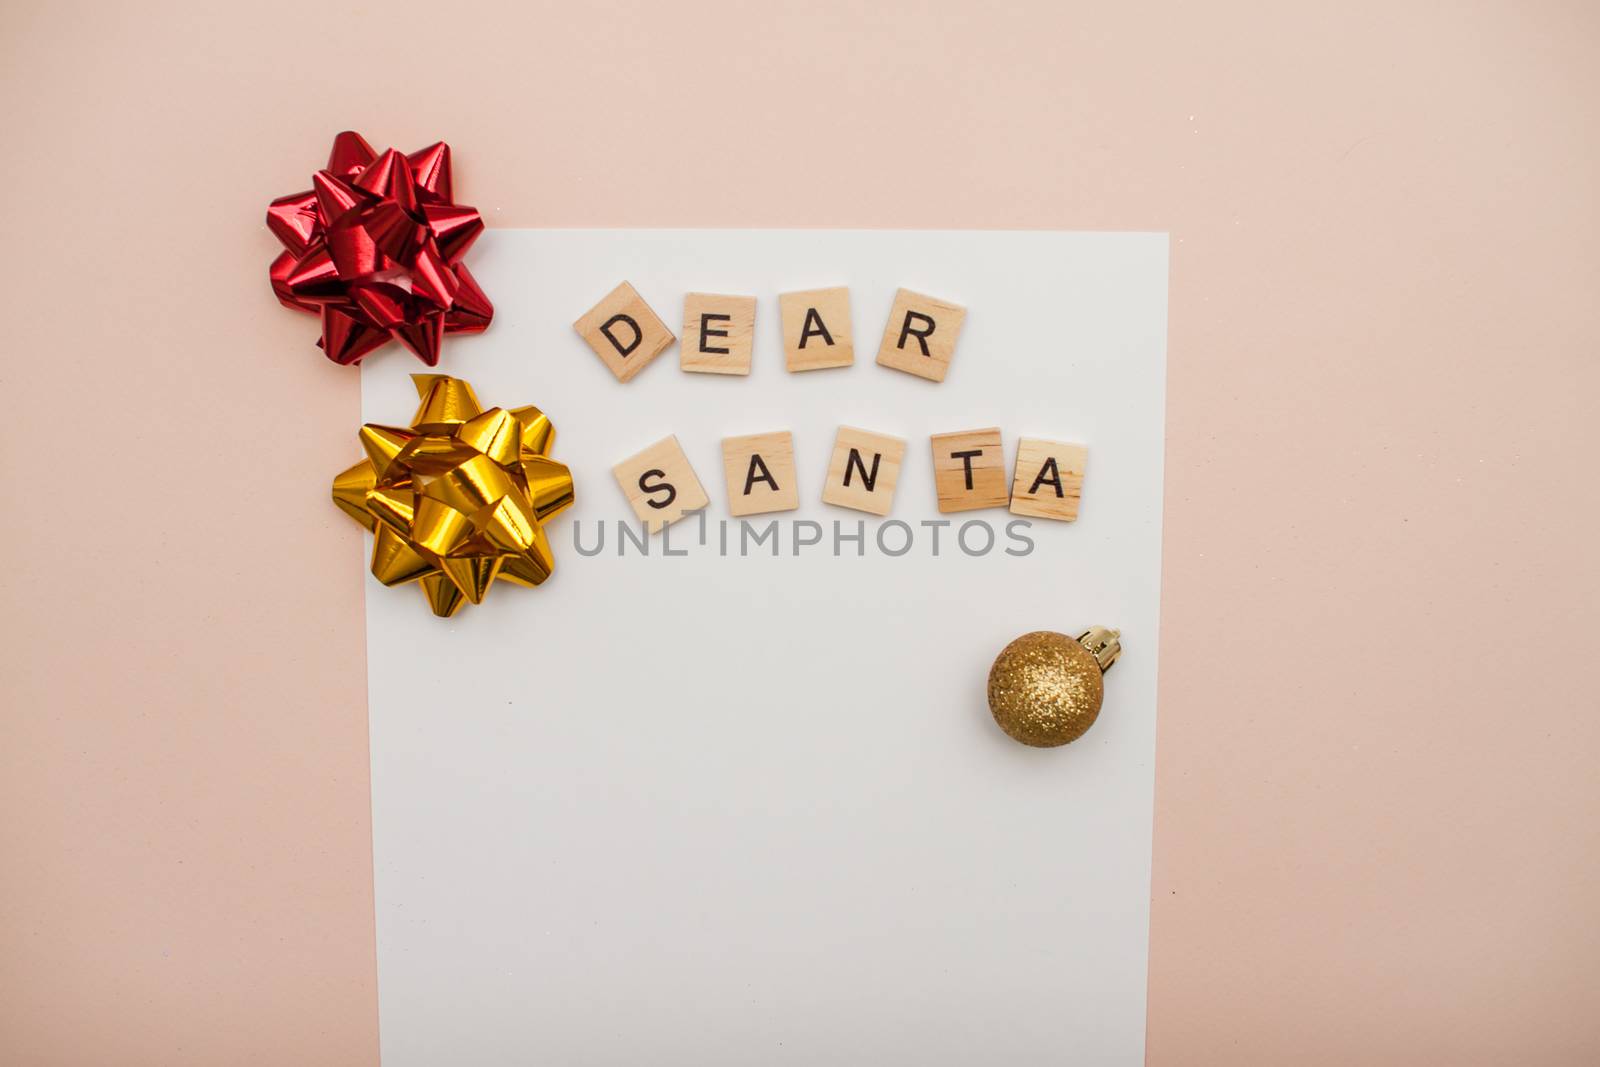 Inscription from wooden blocks dear santa on a white blank sheet of paper. New Year's wish list. Letter to Santa Claus